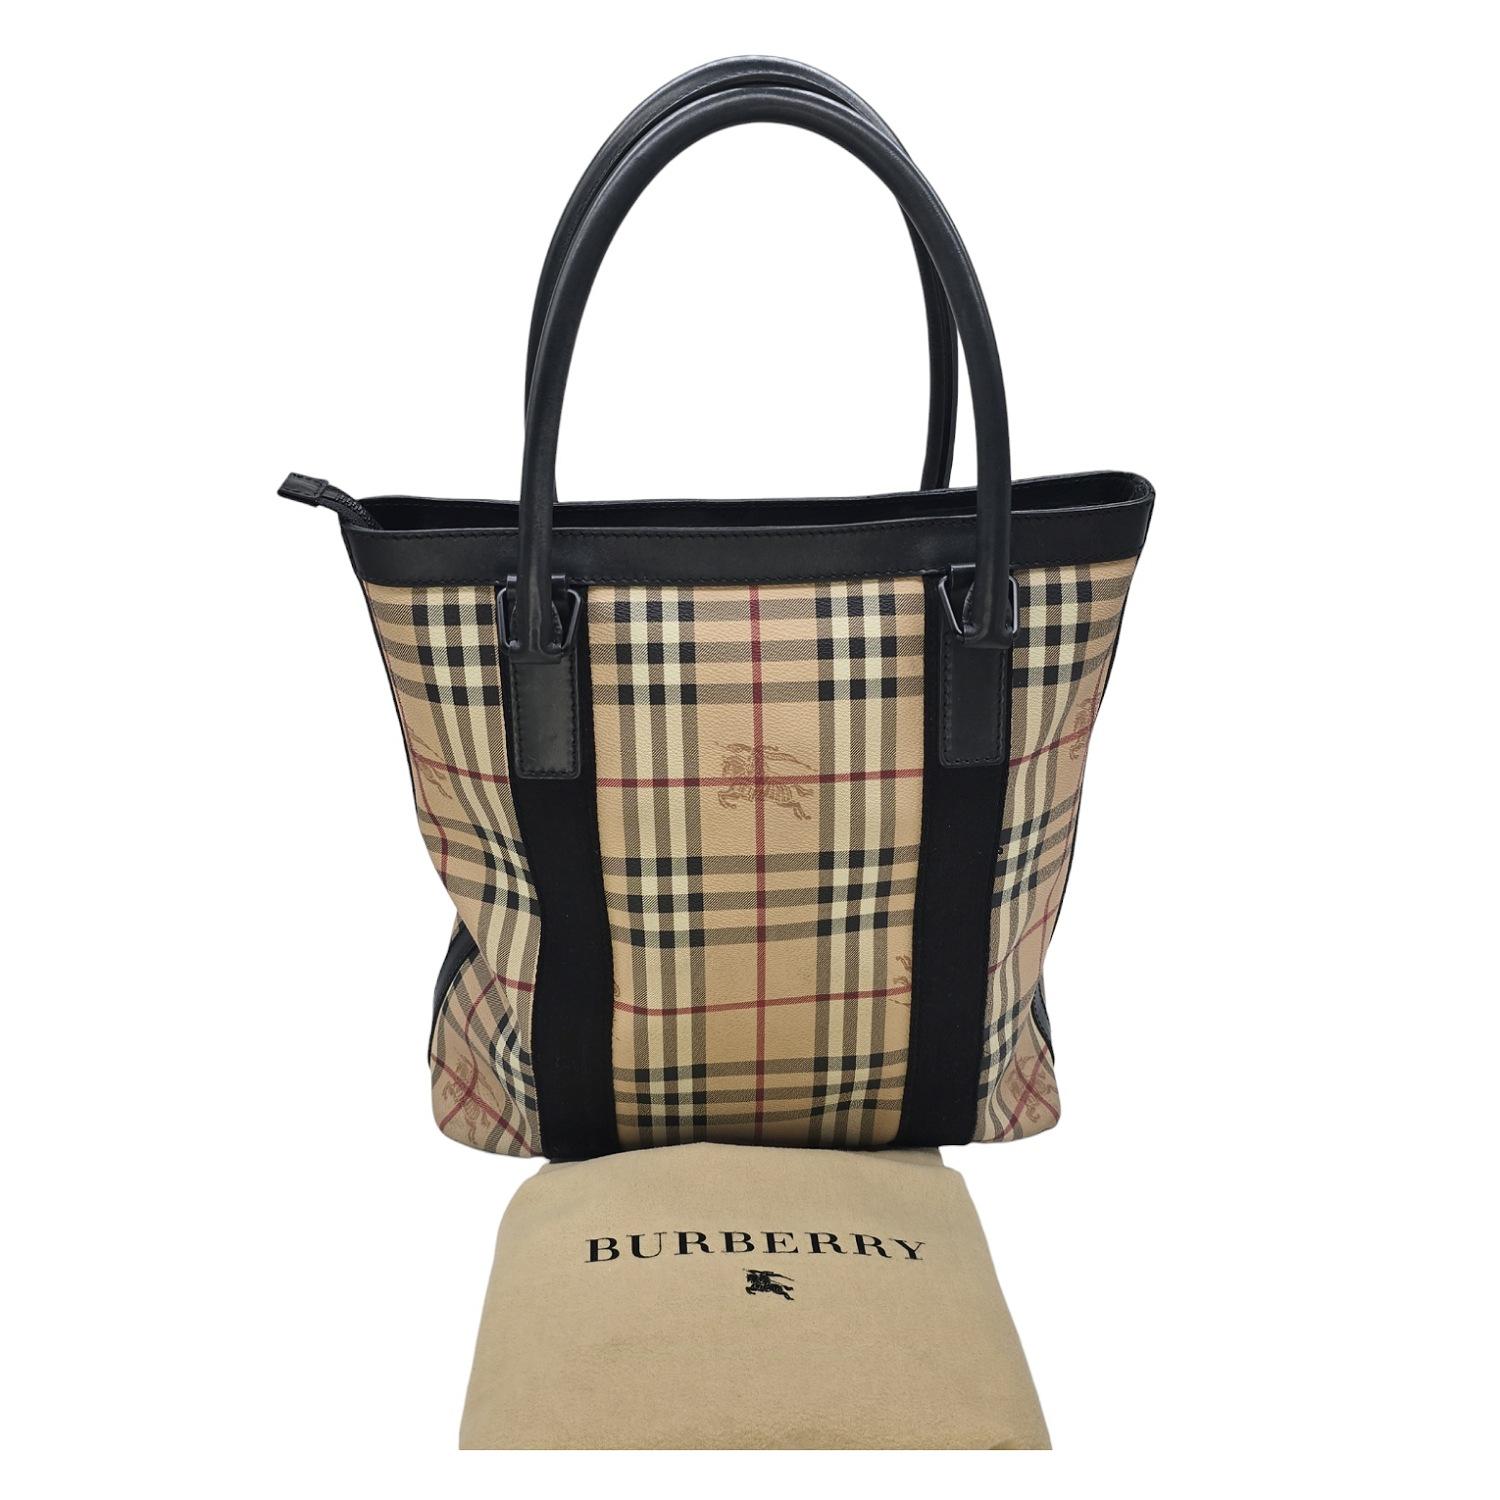 Introducing the Burberry Haymarket Check Coated Canvas Tote. This exquisite tote boasts a sophisticated Beige color with a multicolor check pattern and Leather trim, evoking a sense of elegance and exclusivity. The roomy fabric interior with